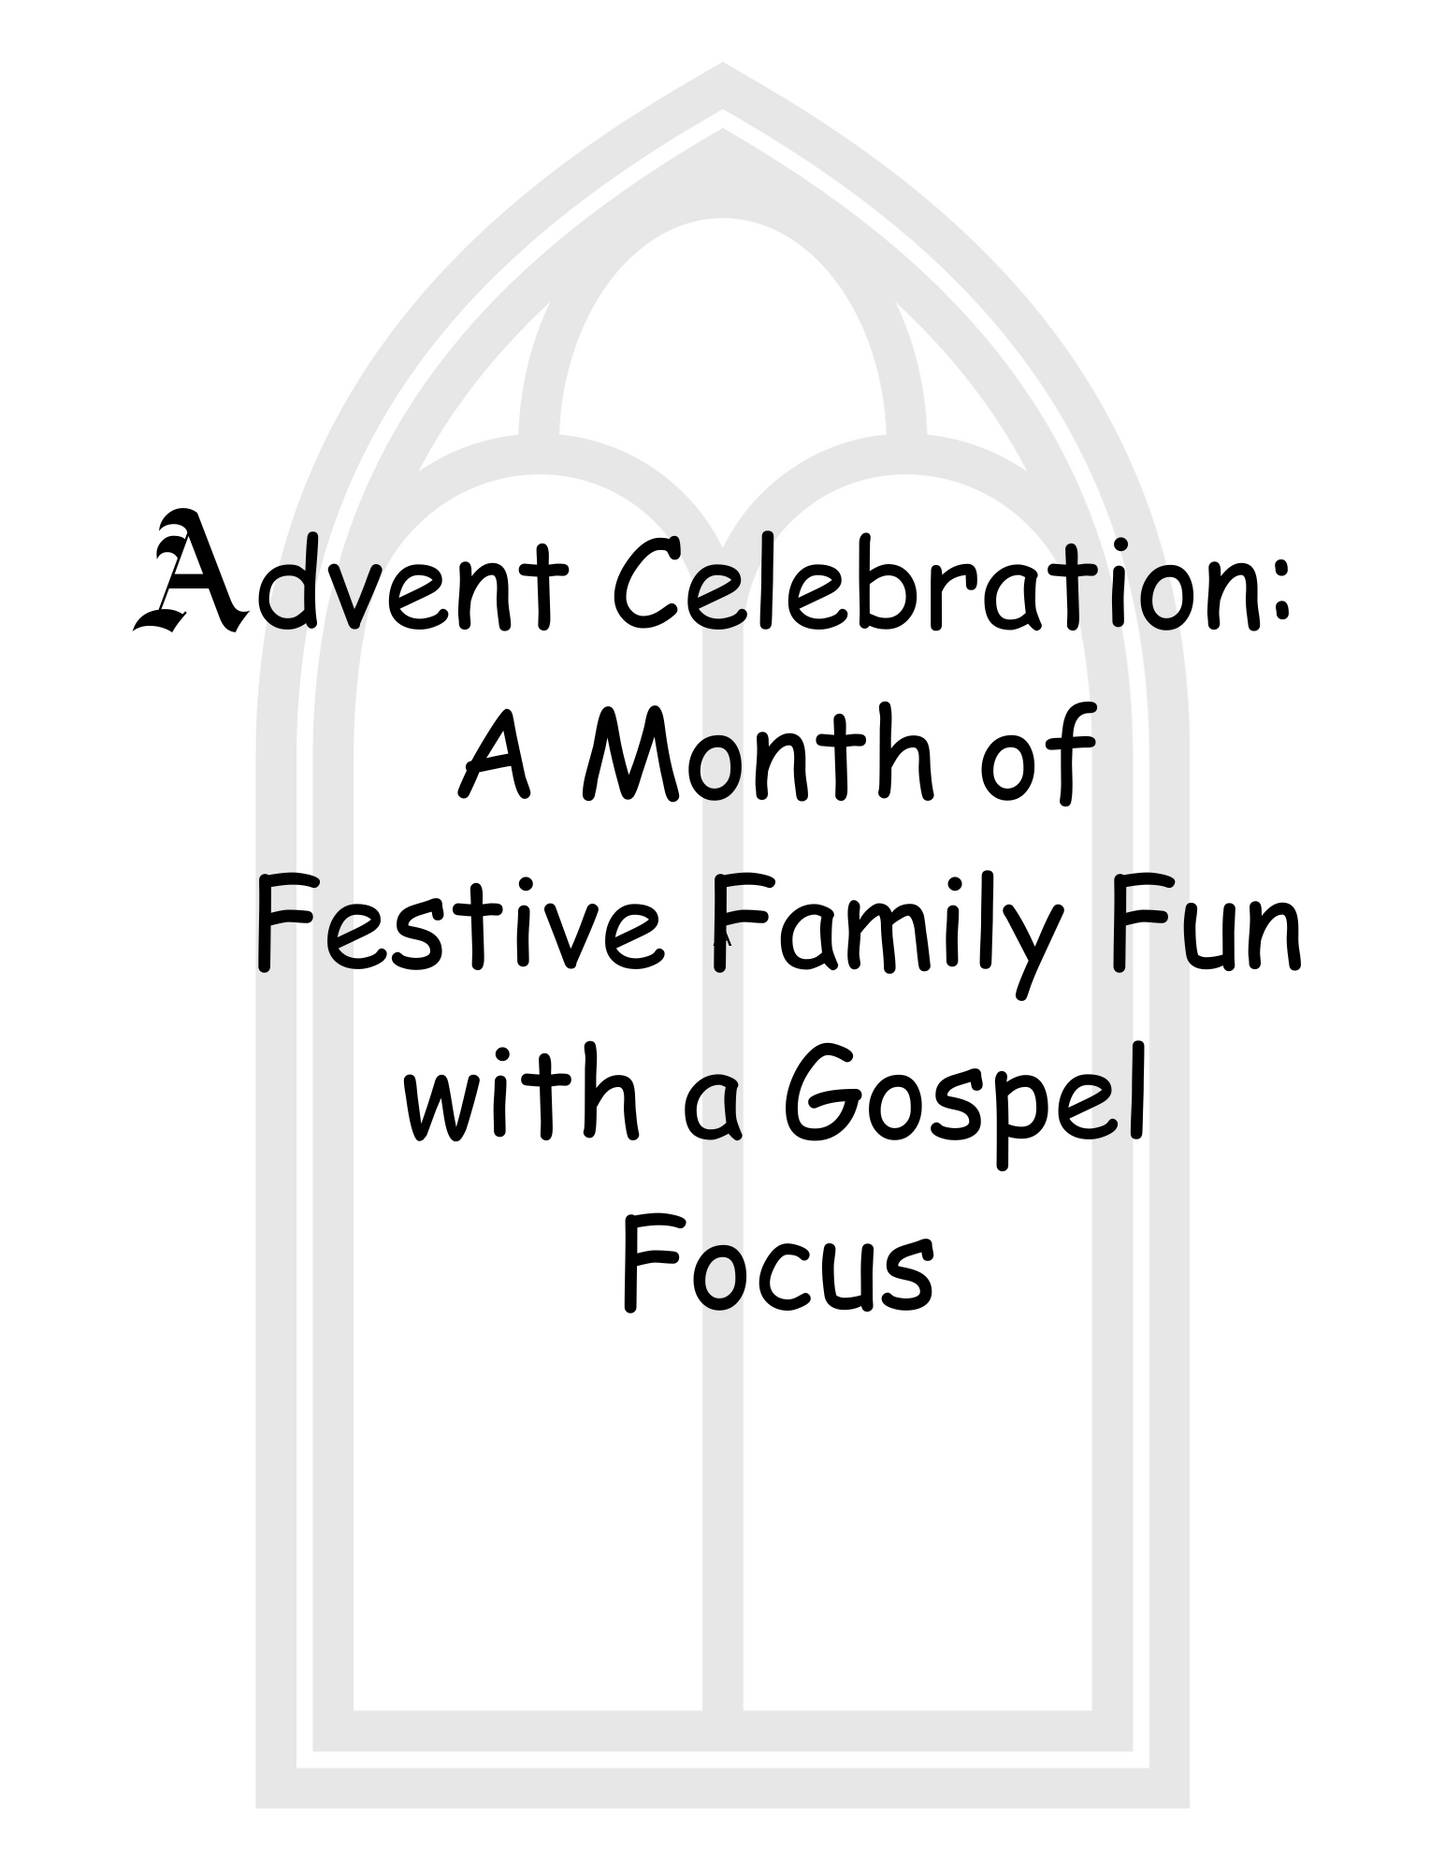 Advent Celebration: A Month of Festive Family Fun with a Gospel Focus